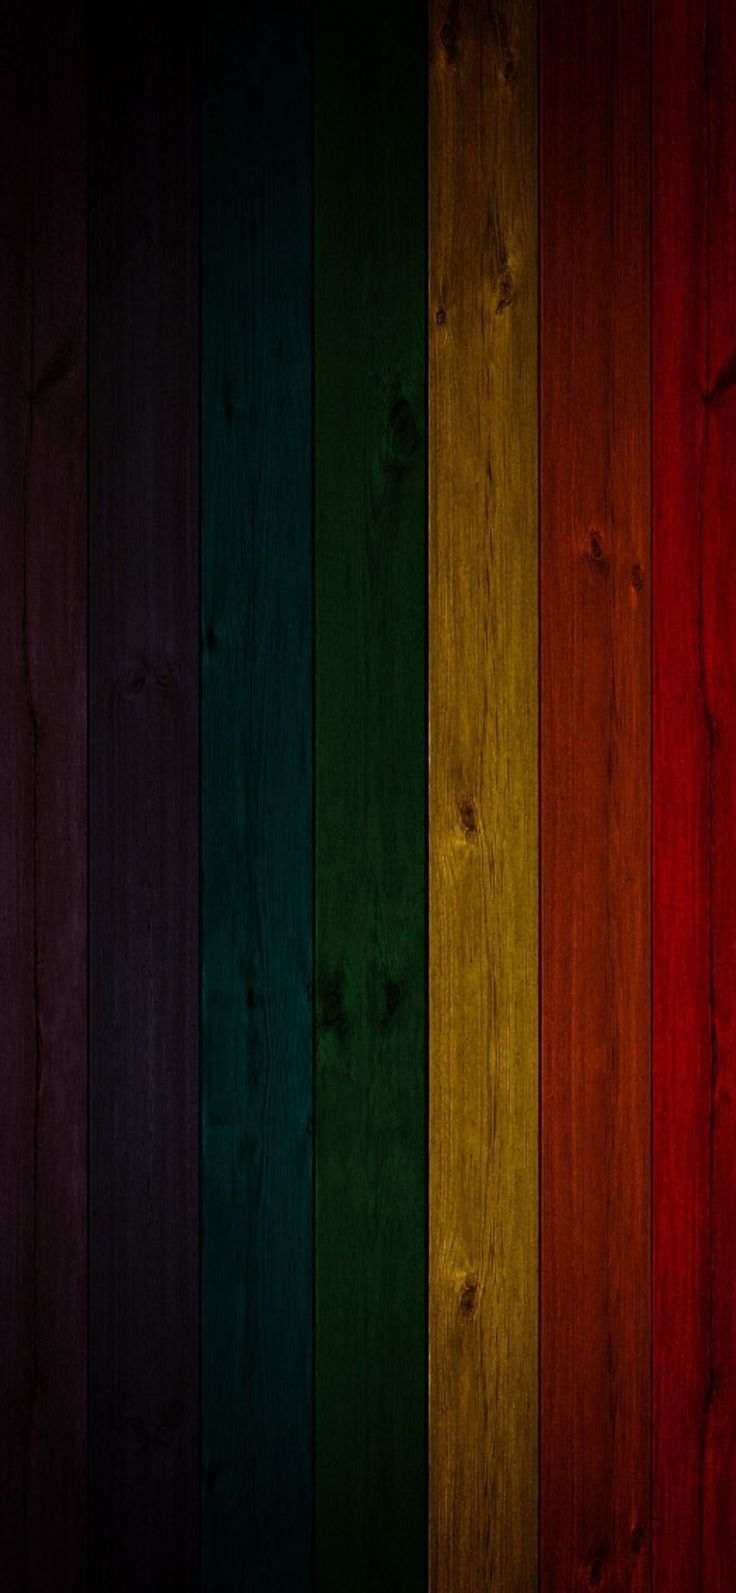 Colorful wood textures background iPhone Wallpaper. Textured background, Wood texture background, Wood texture - Woods